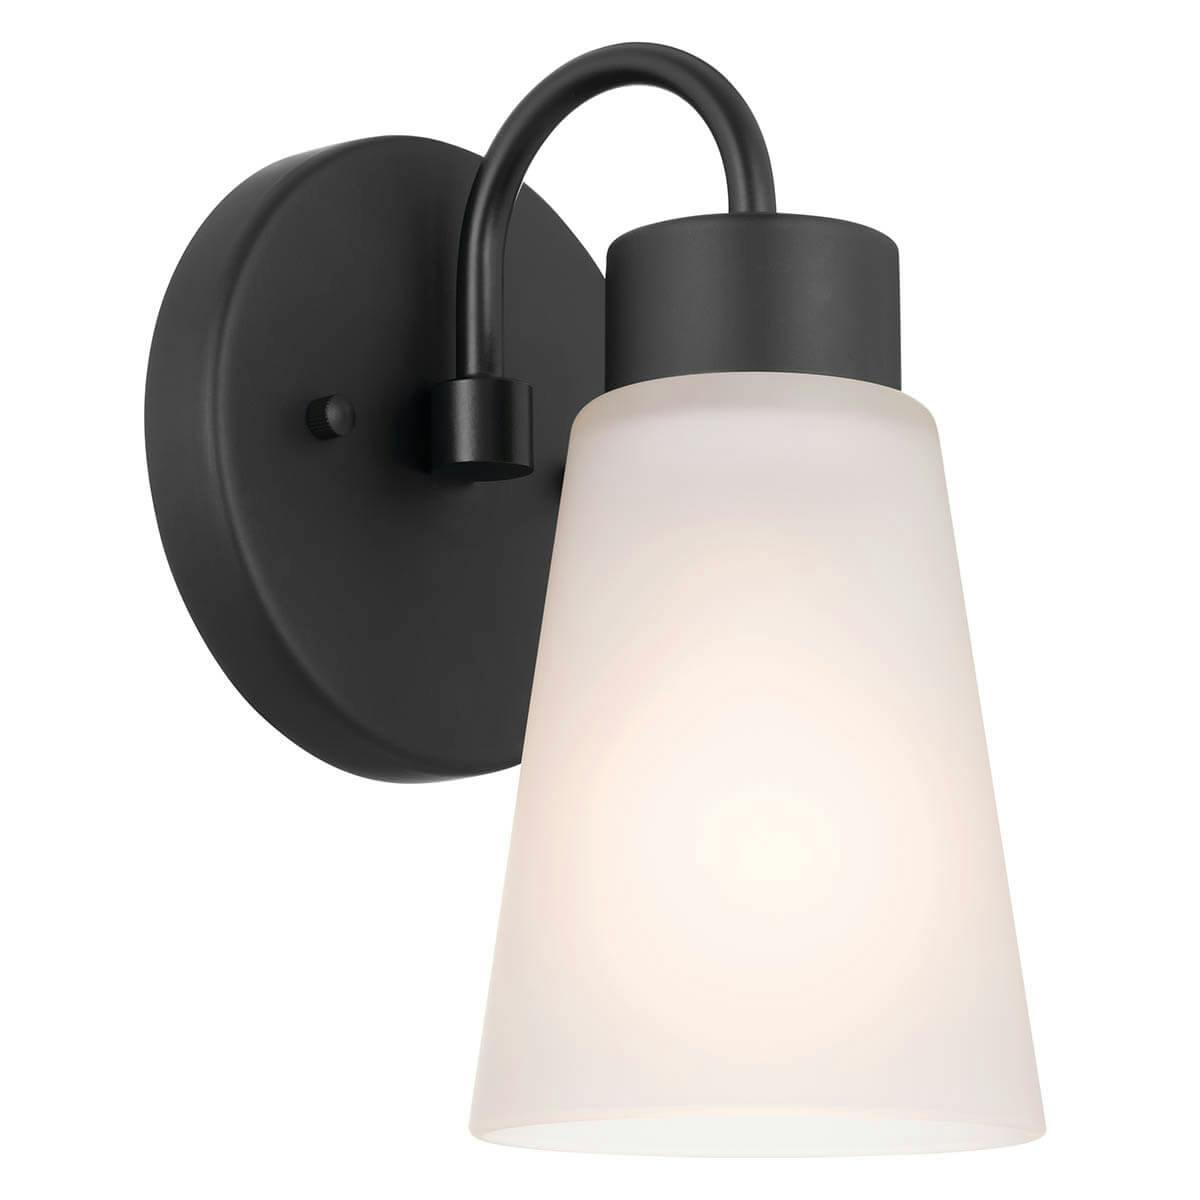 Erma 4.25" 1 Light Wall Sconce Black on a white background